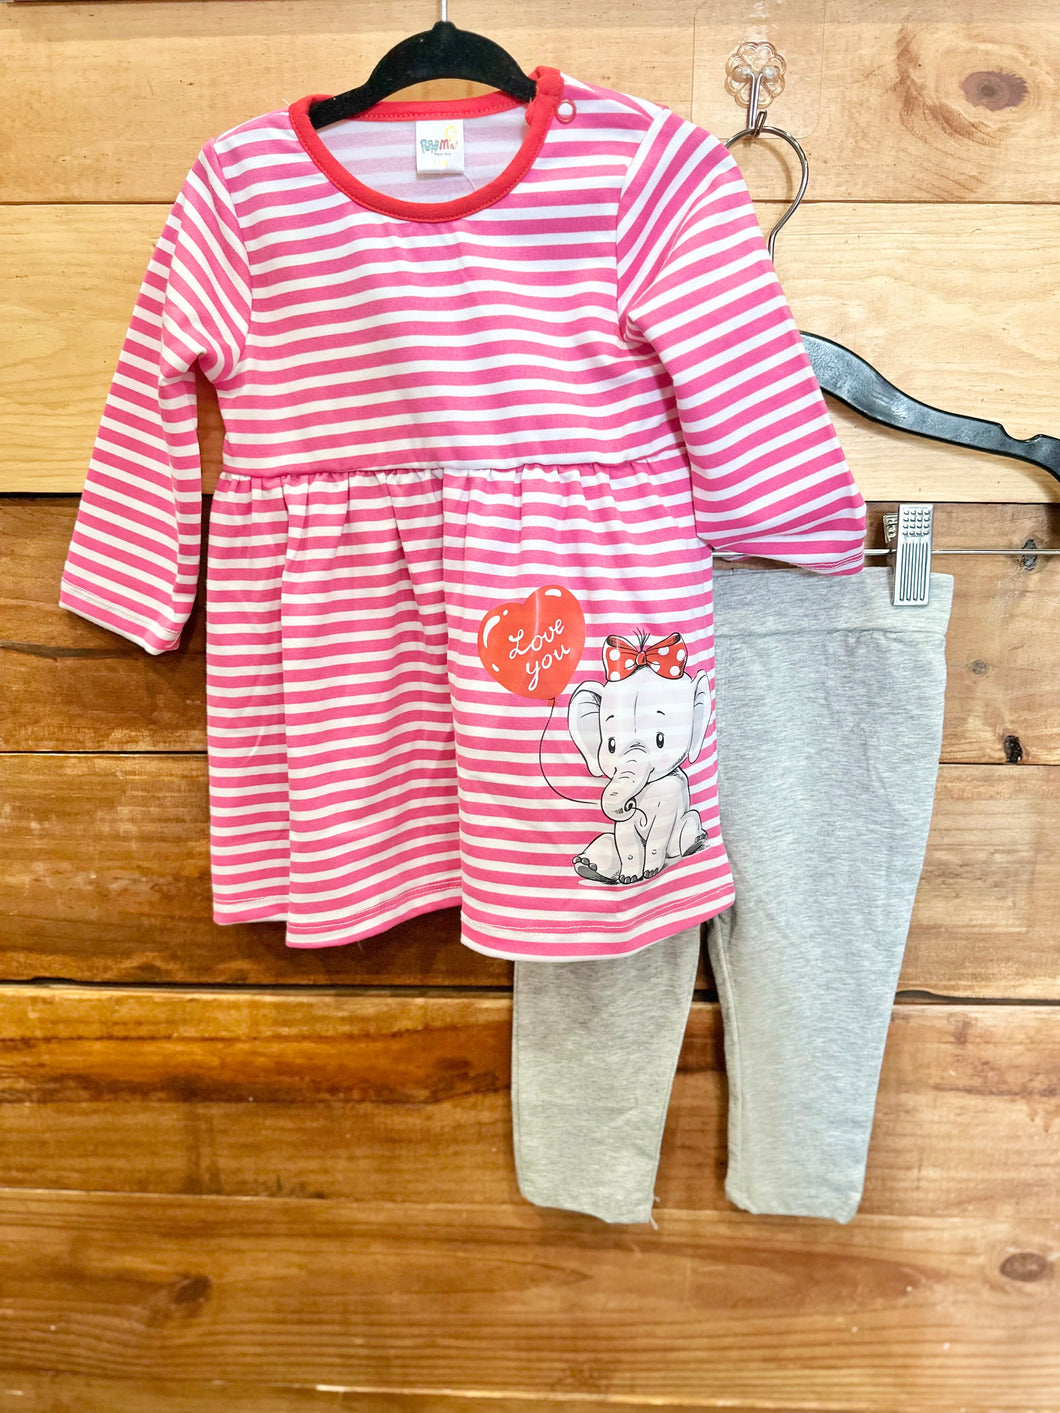 Peppy Mini Love You 2pc Outfit Size 12m